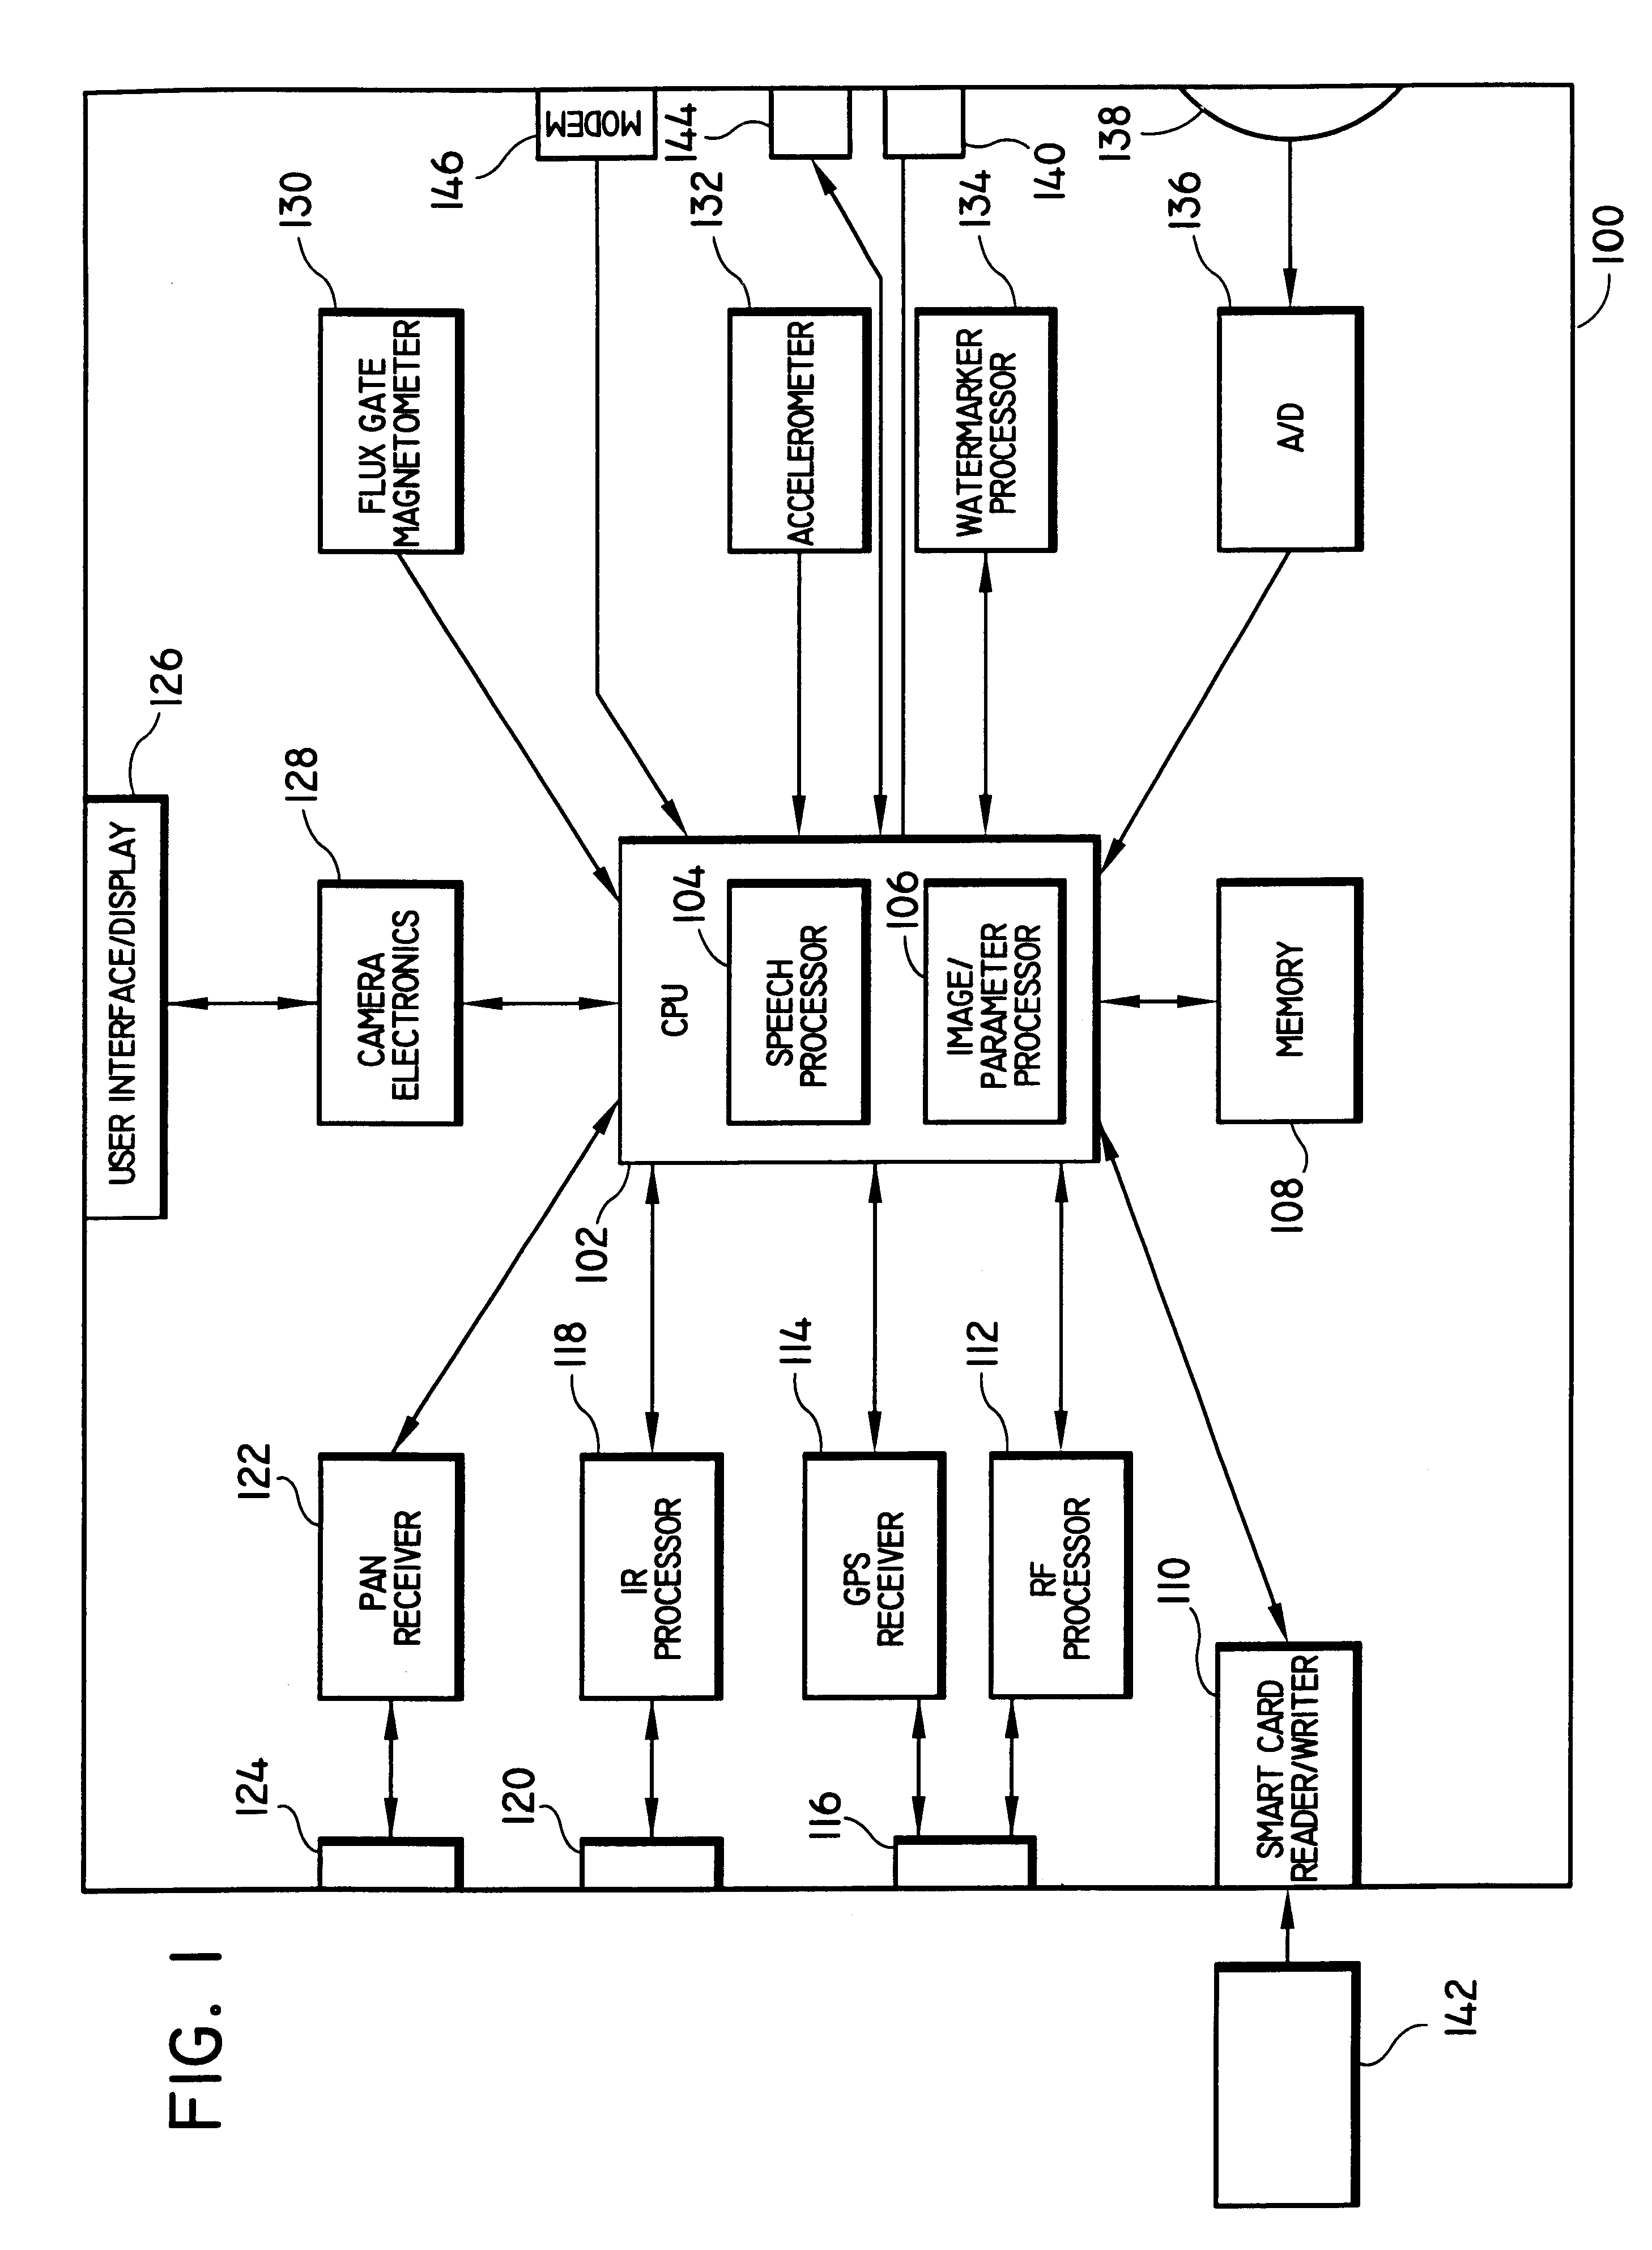 System and methods for querying digital image archives using recorded parameters